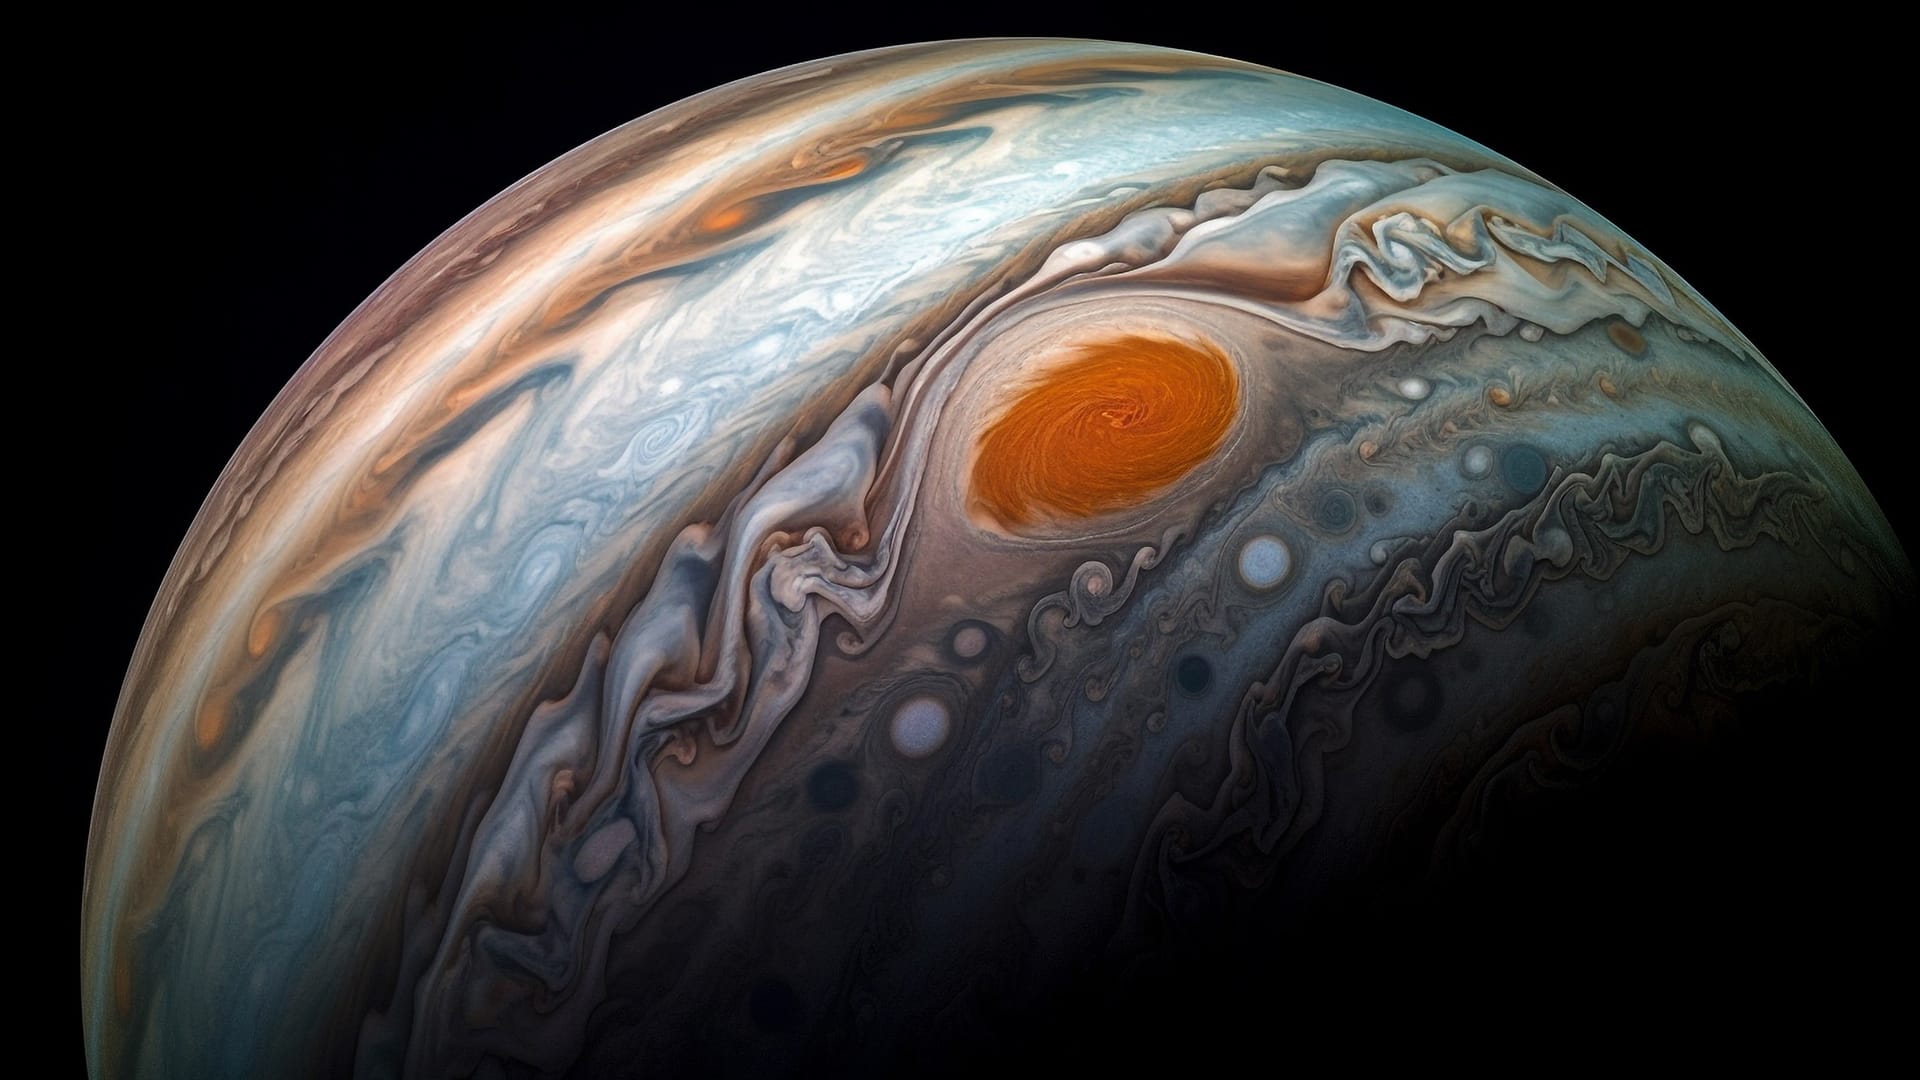 What type of planet is Jupiter?